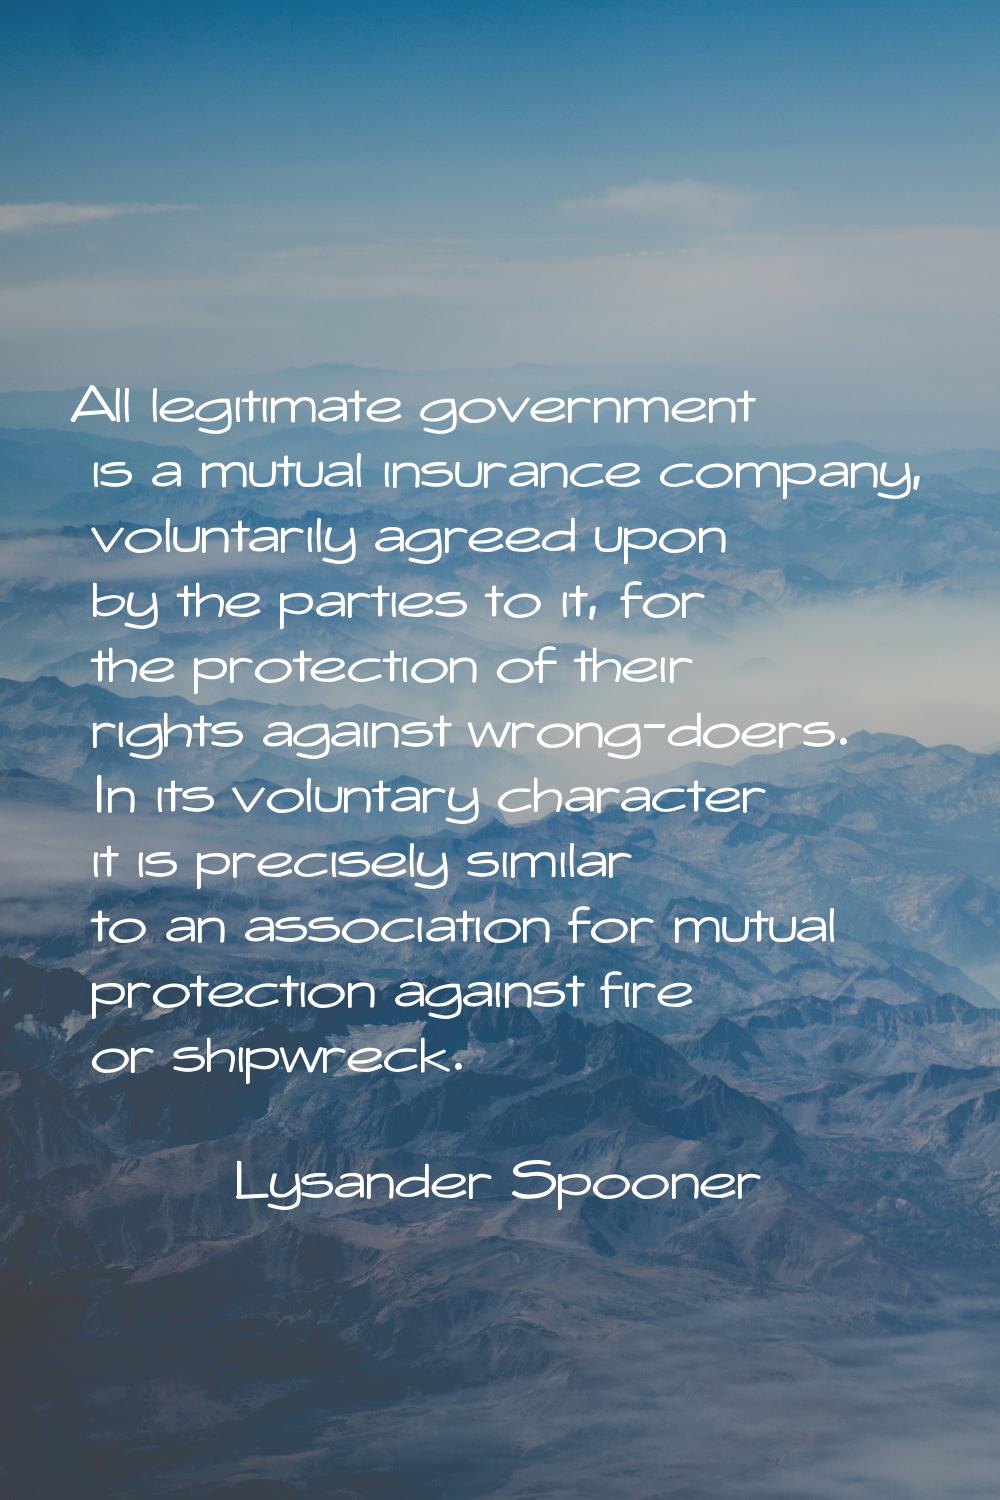 All legitimate government is a mutual insurance company, voluntarily agreed upon by the parties to 